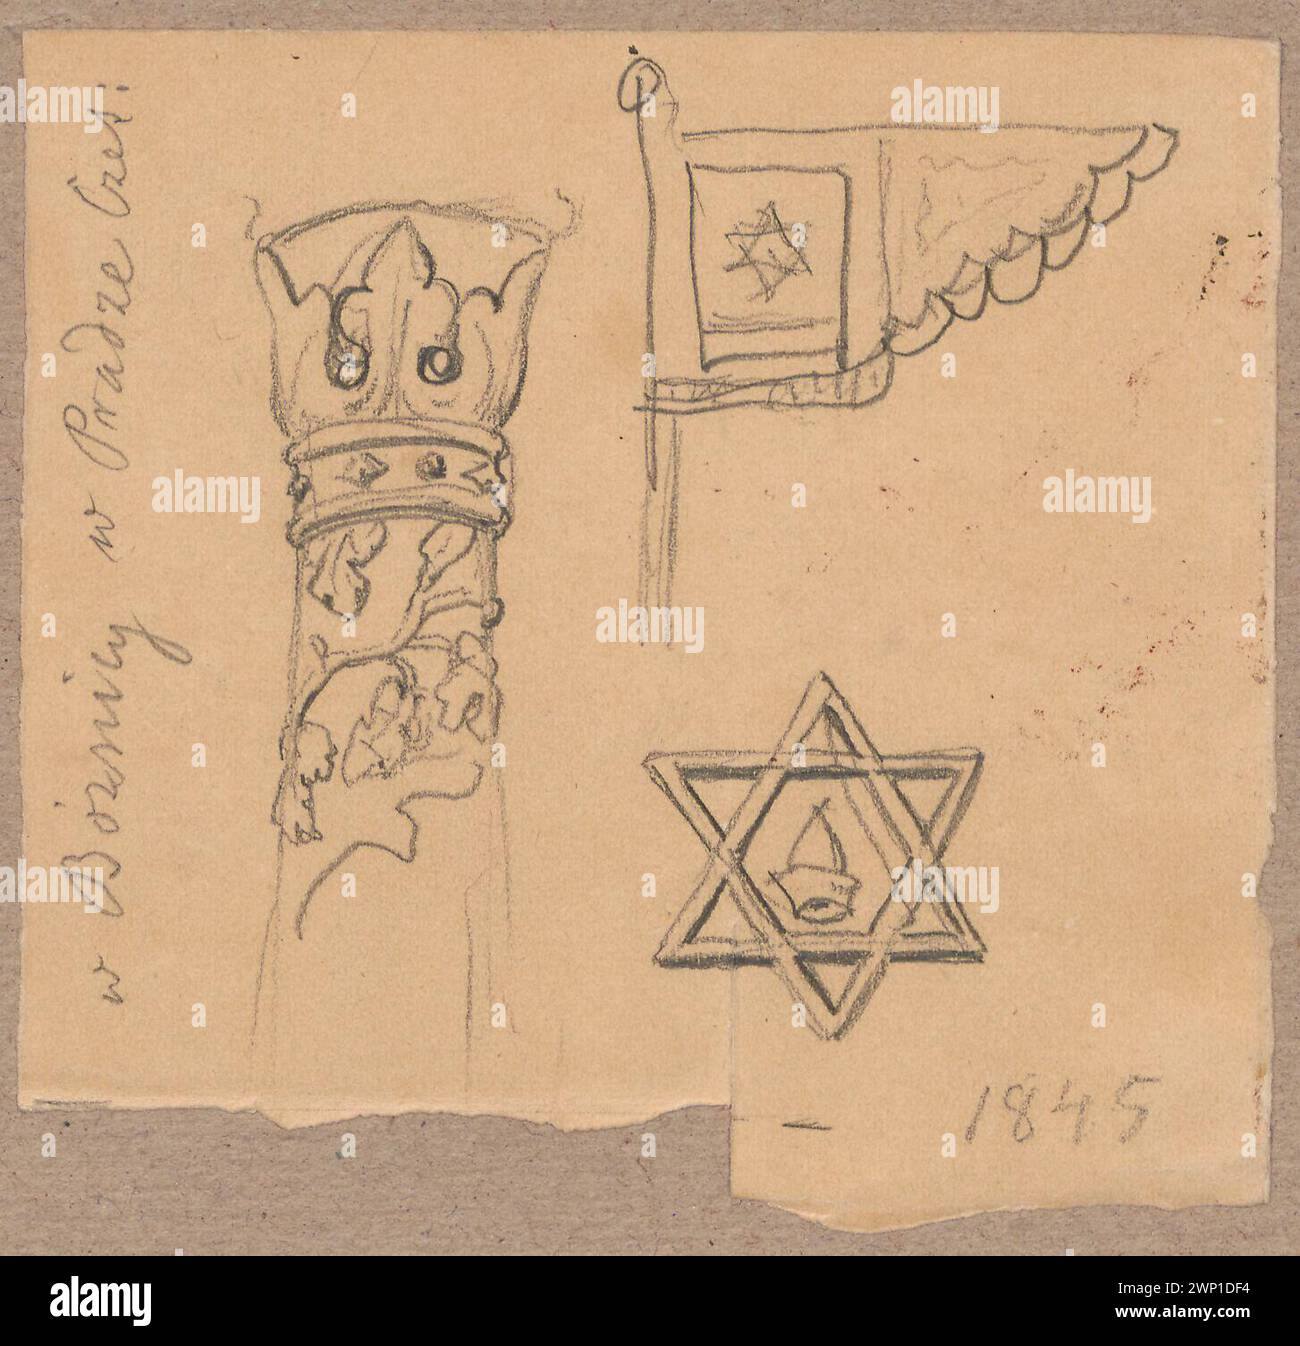 Prague (Czech Republic). Judaica from the synagogue; Verso: a fragment of the sketch of the character on horseback; Lesser, Aleksander (1814-1884); 1845 (1845-00-00-1845-00-00);Czech Republic, David Star, Lesser, Aleksander (1814-1884), Lesser, Aleksander (1814-1884) - collections, Lesser, Emiljan Stanisław (Baron - 1847-1912), Lesser, Emiljan Stanisław (Baron - 1847-1912) - collection , Lesser, Wiktor Stanisław Zygmunt (Baron - 1853-1935), Lesser, Wiktor Stanisław Zygmunt (Baron - 1853-1935) - collection, Prague (Czech Republic), synagogue (Praga - Czech Republic), architecture, foreign archi Stock Photo